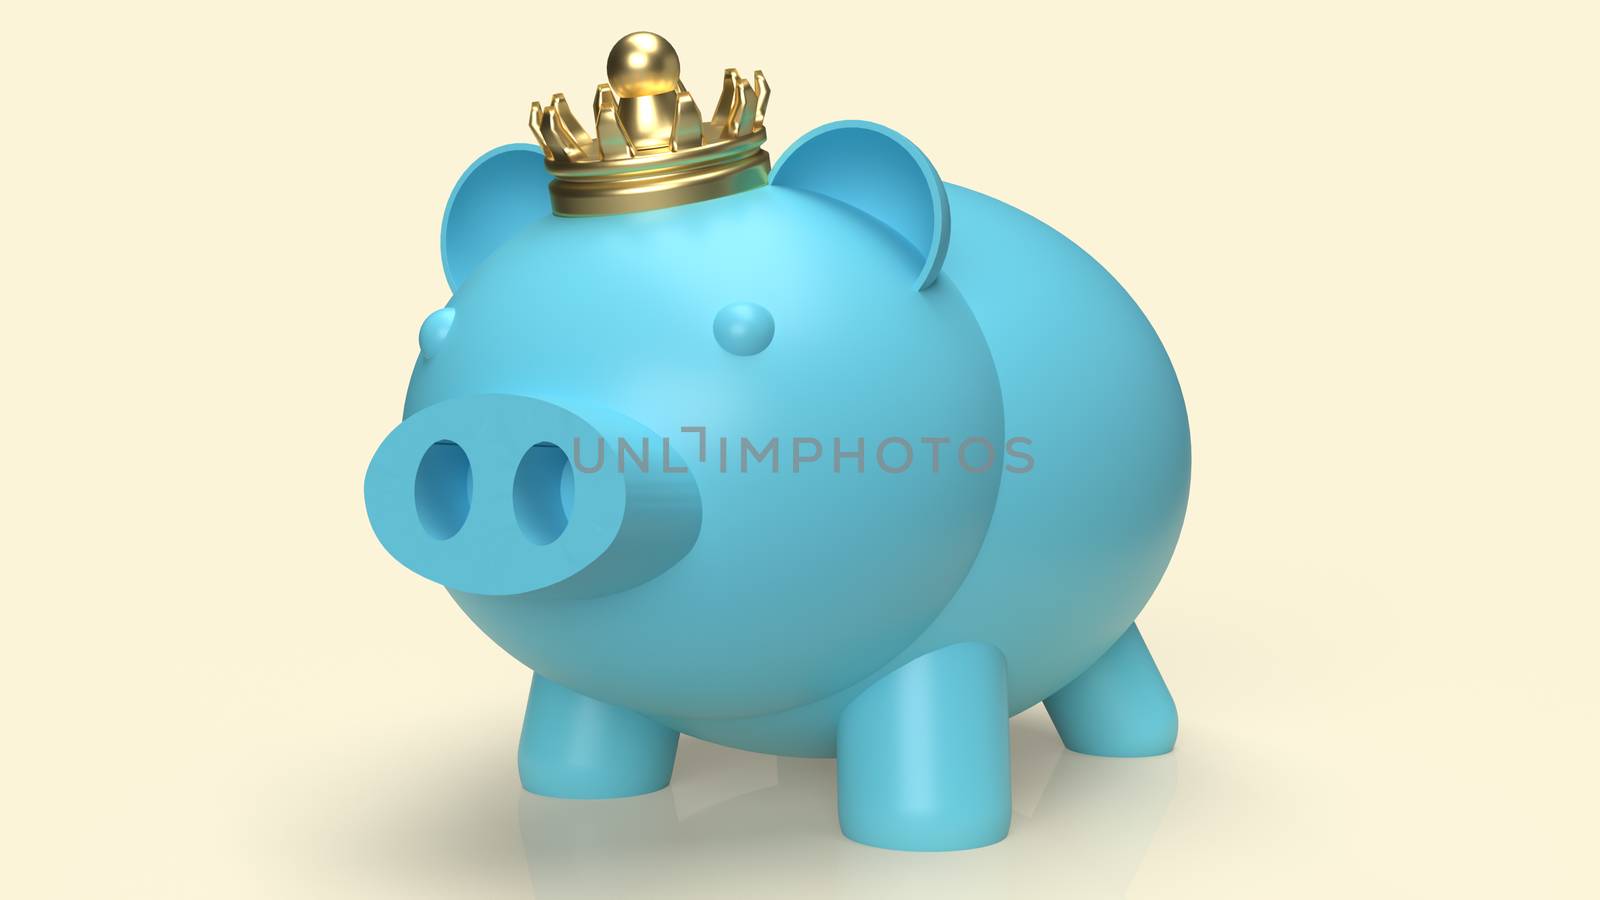 The blue pig bank and crown for business content 3d rendering
 by Niphon_13